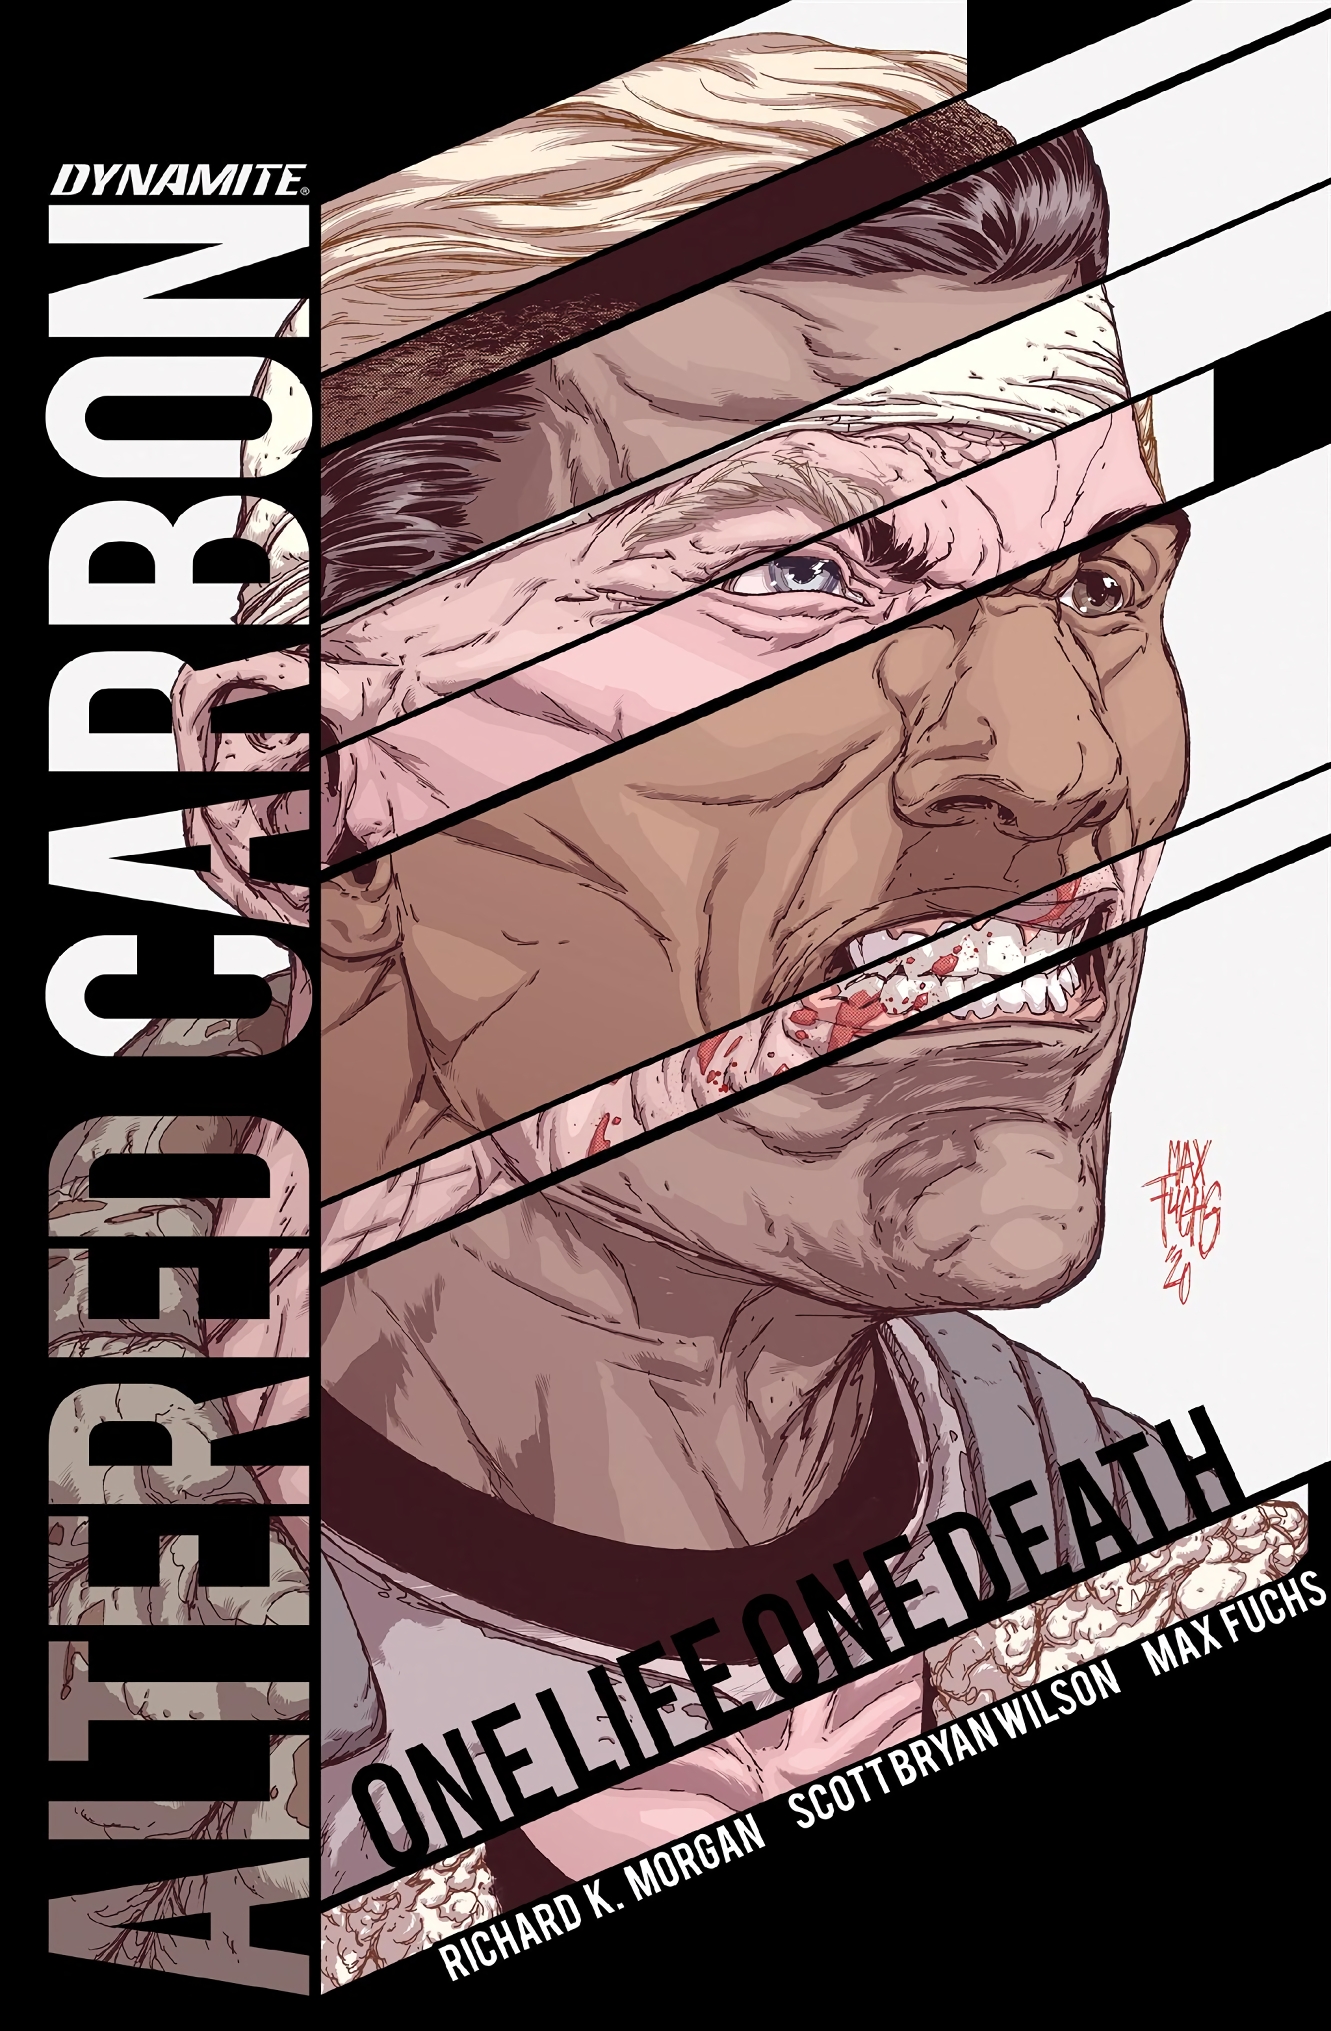 Read online Altered Carbon: One Life One Death comic -  Issue # TPB - 1